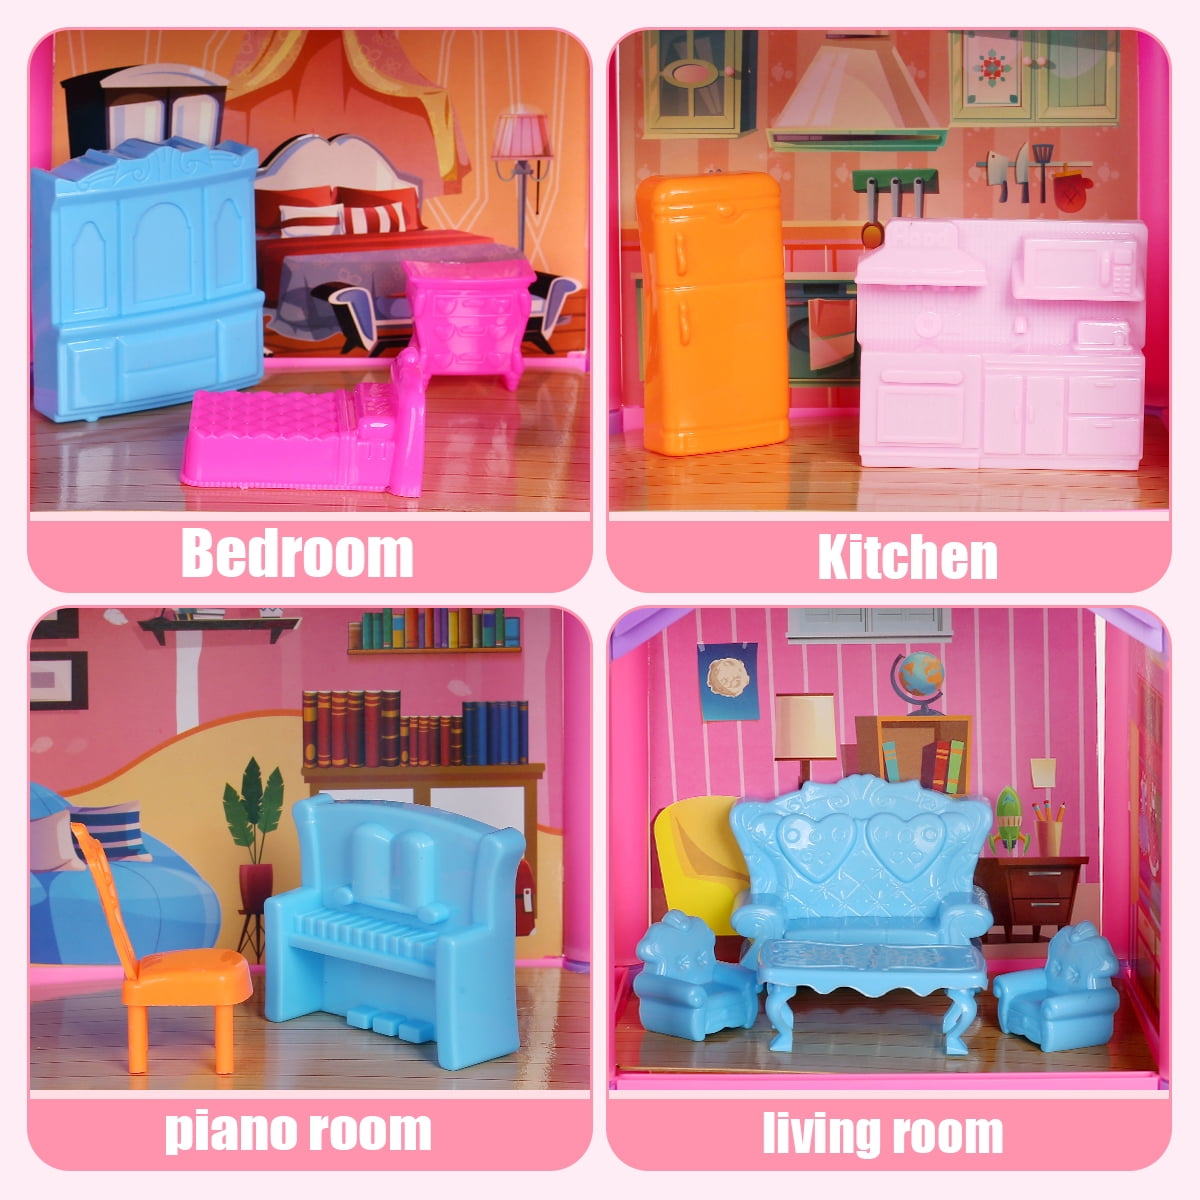 JoyStone DollHouse with Colorful Light and 7 Rooms for Girl, Huge Doll House  DIY Pretend Dream Toy with 3 Dolls, Dreamy Princess House for Kids Gifts  Ages 4-8, Blue 